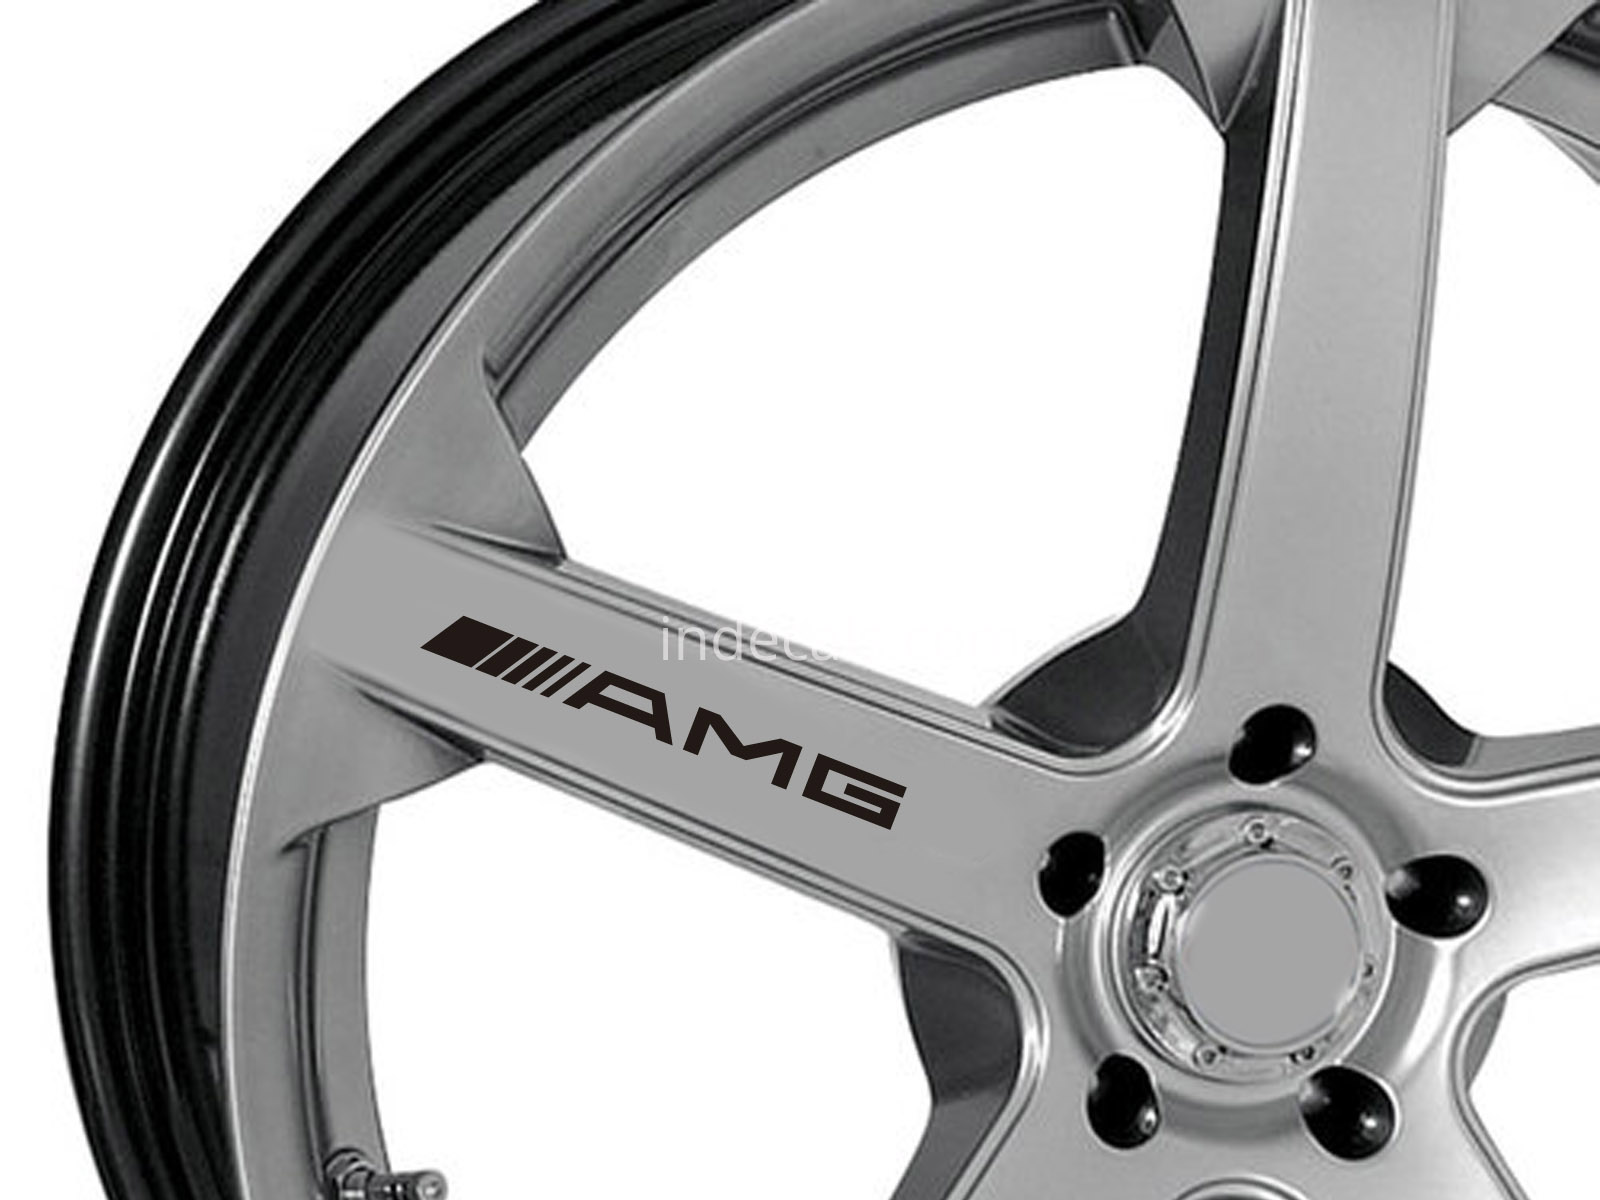 6 x AMG Stickers for Wheels - Black